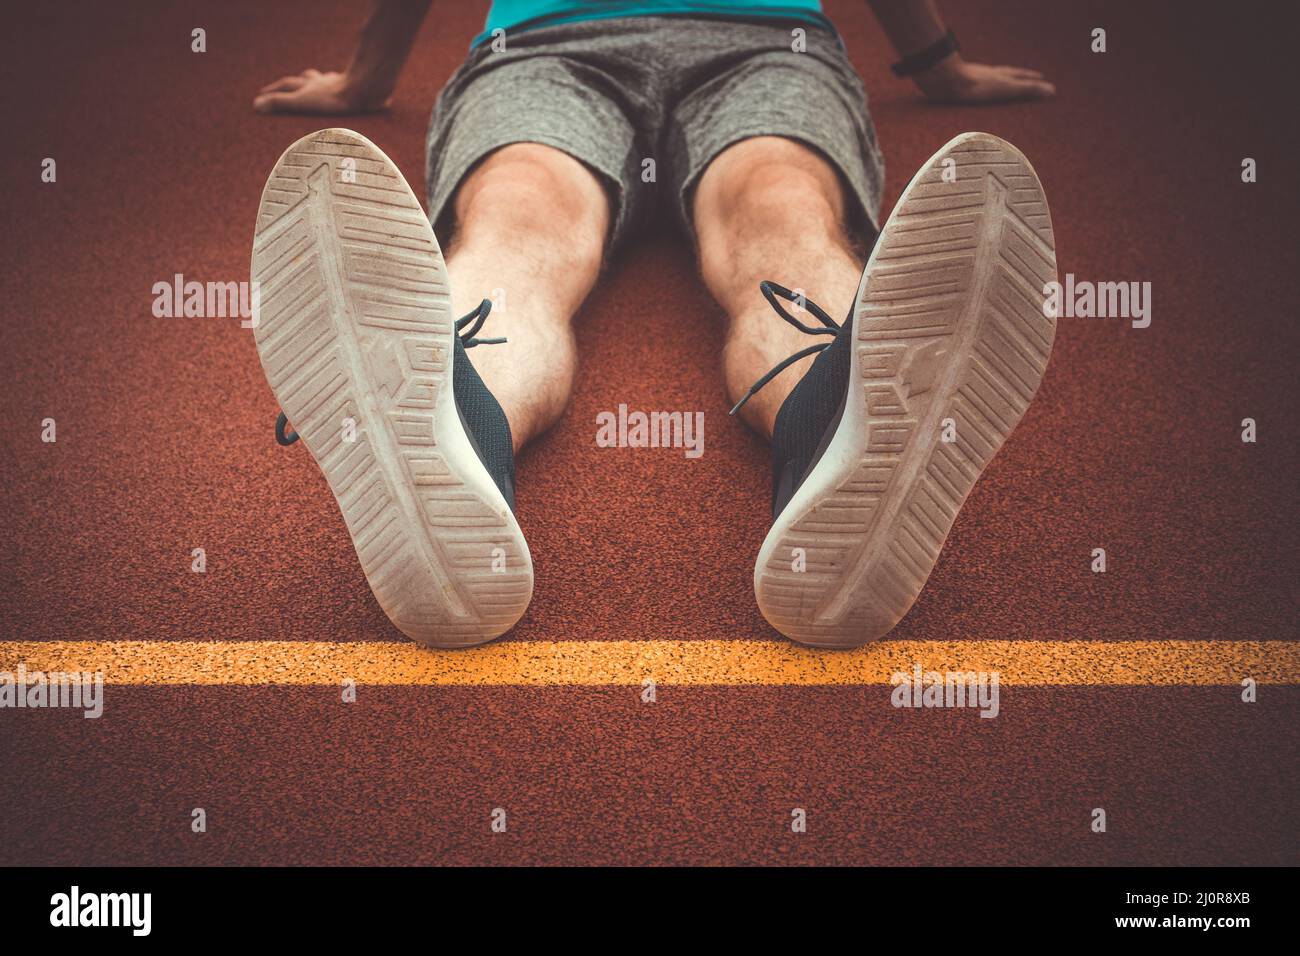 Man runner resting after workout session Stock Photo